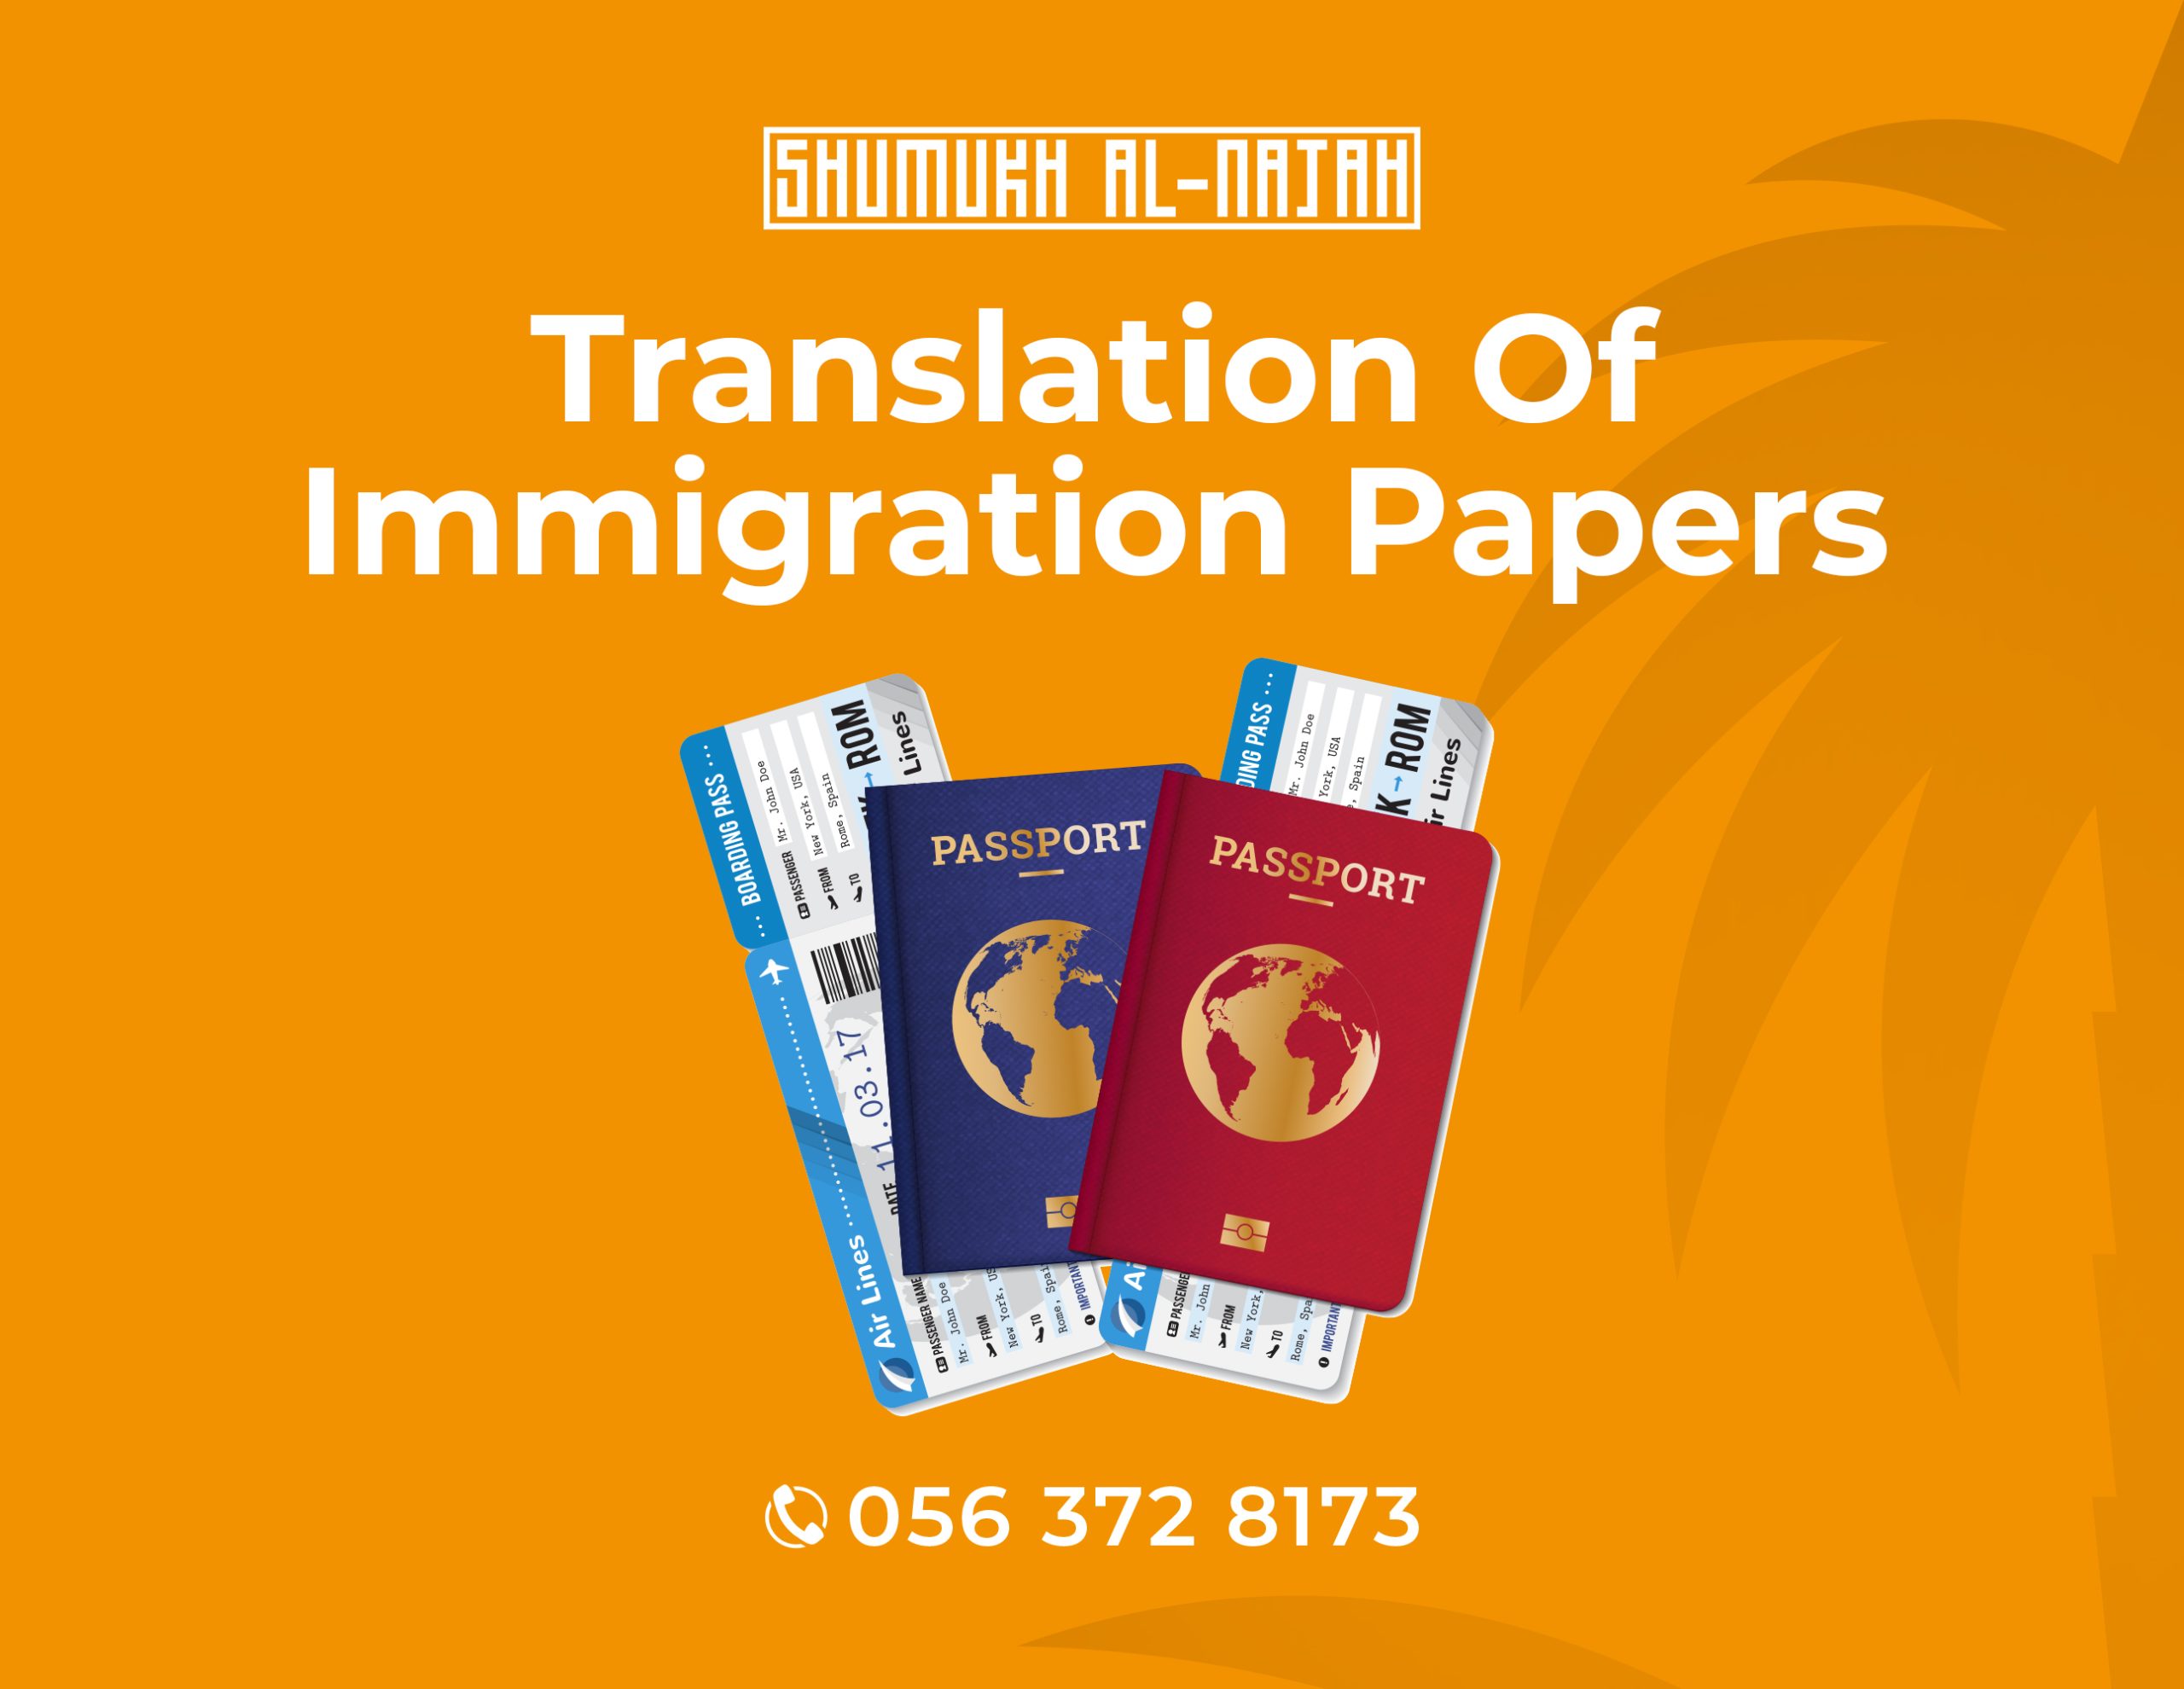 Translation of immigration papers